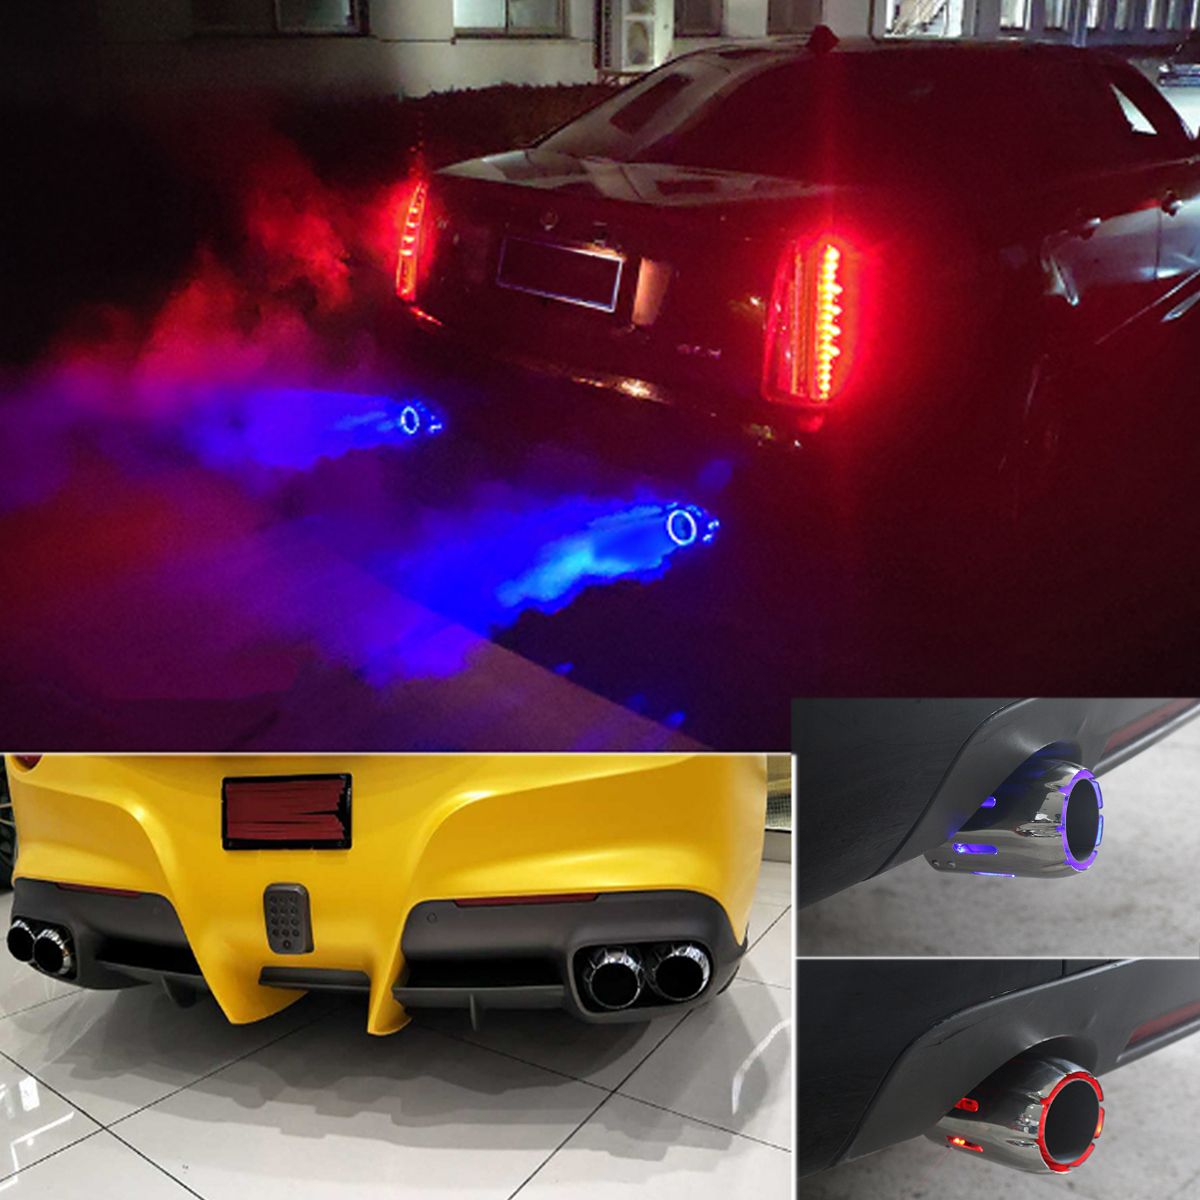 Stainless-Exhaust-Muffler-Tip-63mm-IN-89mm-OUT-With-Blue-Red-LED-Light-Clamp-on-1701198